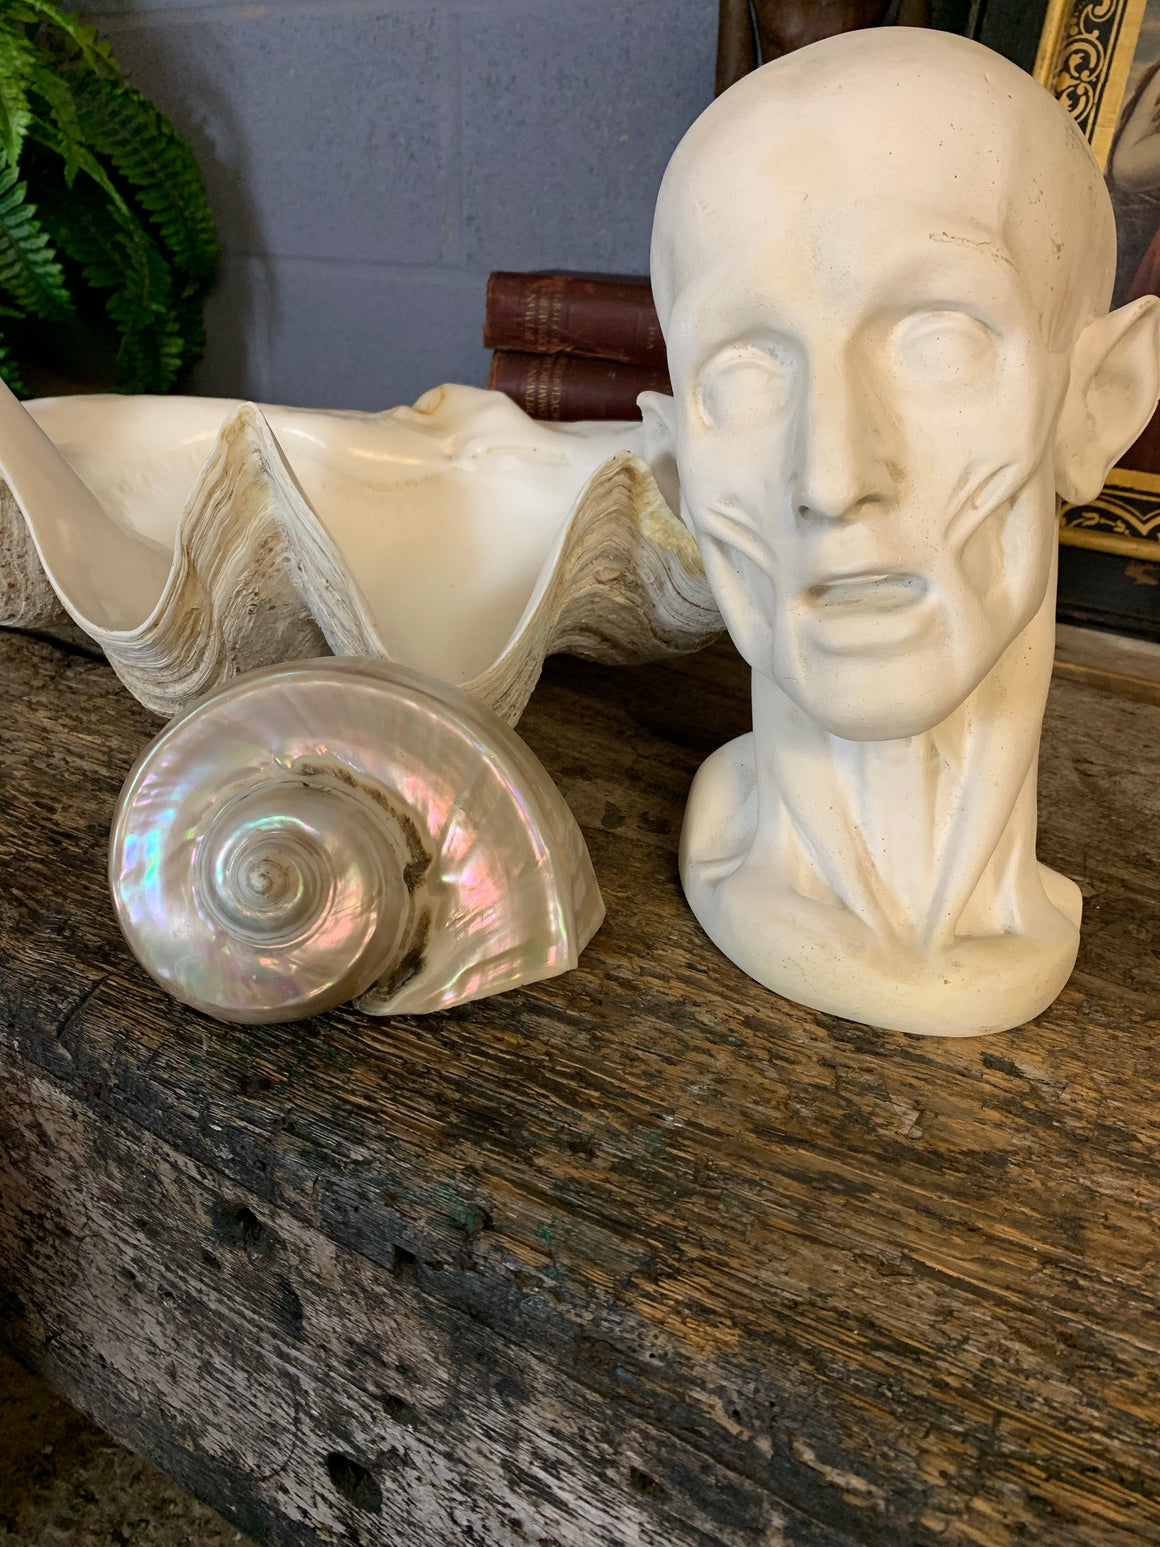 A large mother of pearl Turbo shell - 17.5cm